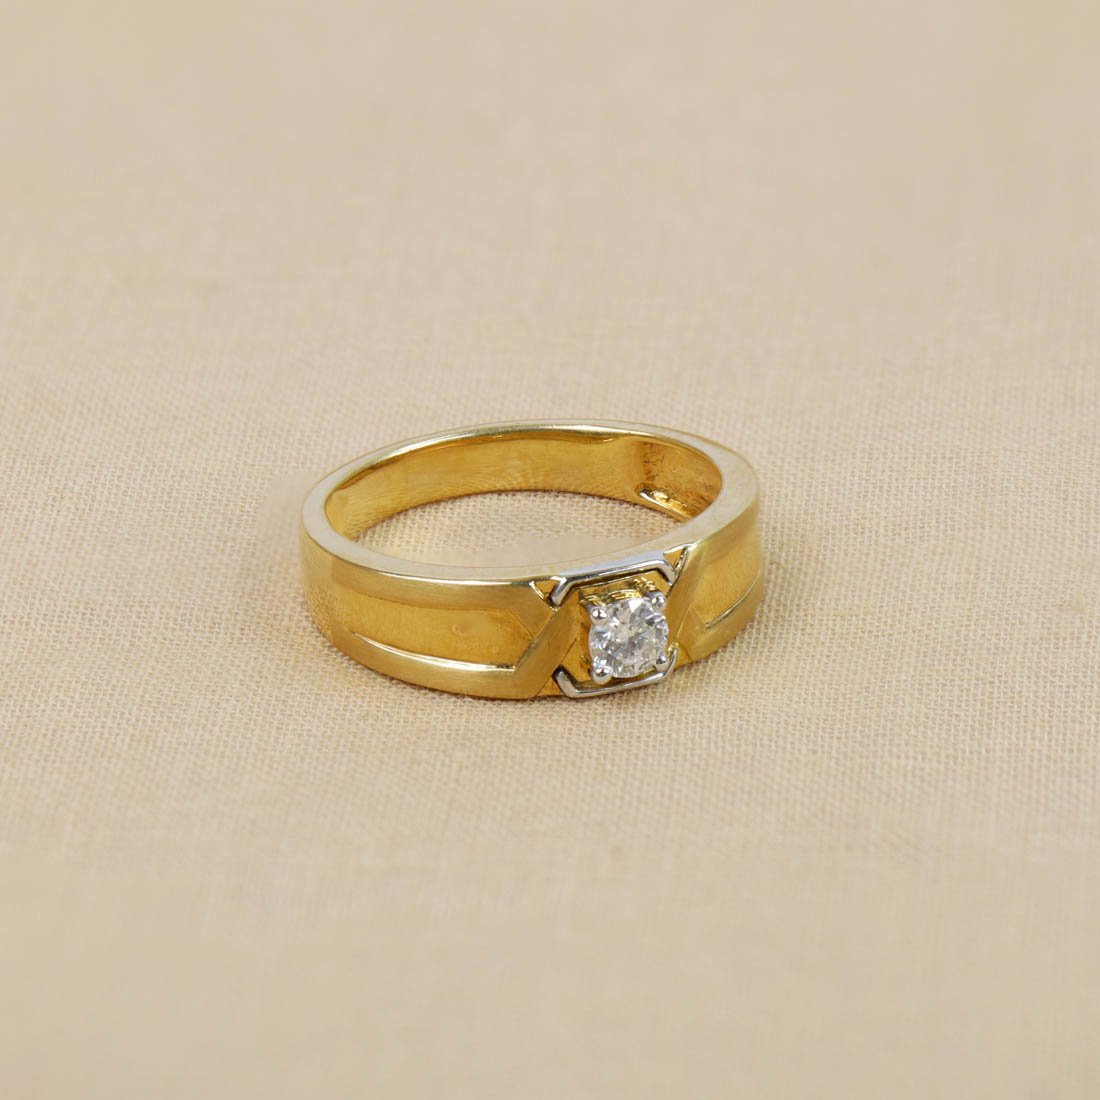 Men's 1ct Simulated Diamond 10kt Solid Yellow Gold Solitaire Ring | eBay